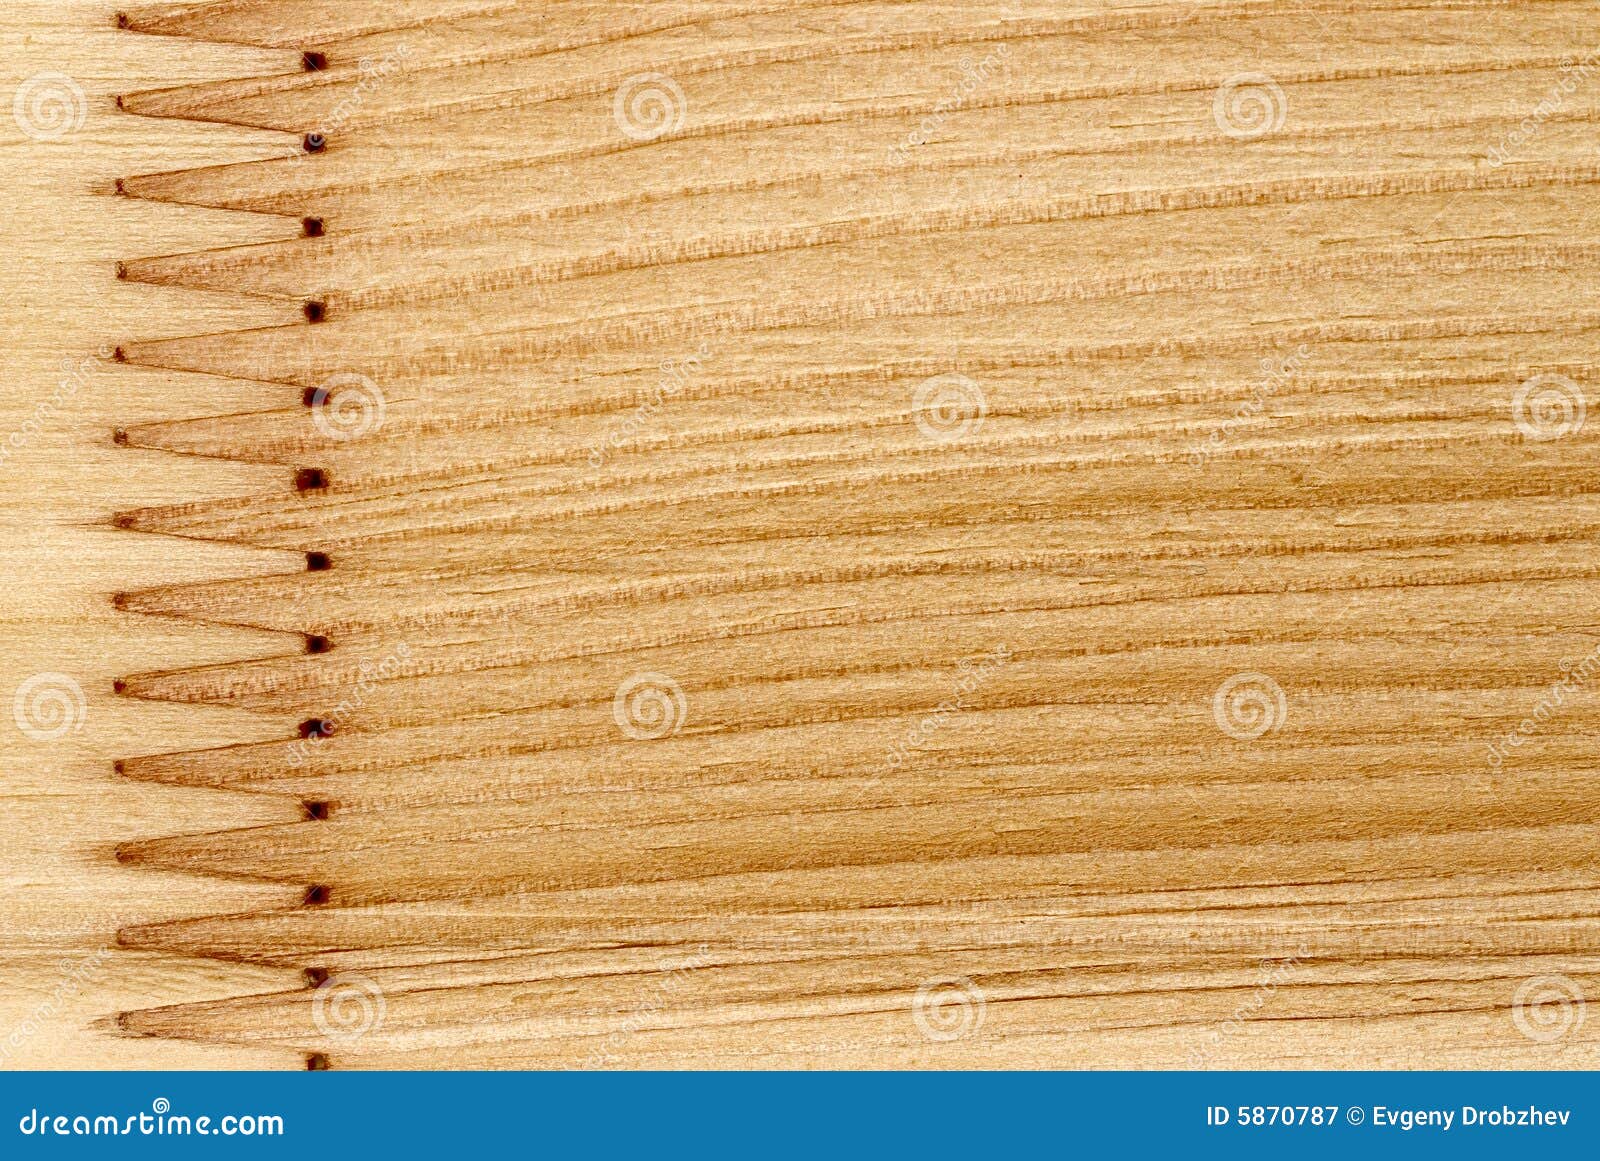 Wood Structure Royalty Free Stock Photography - Image: 5870787